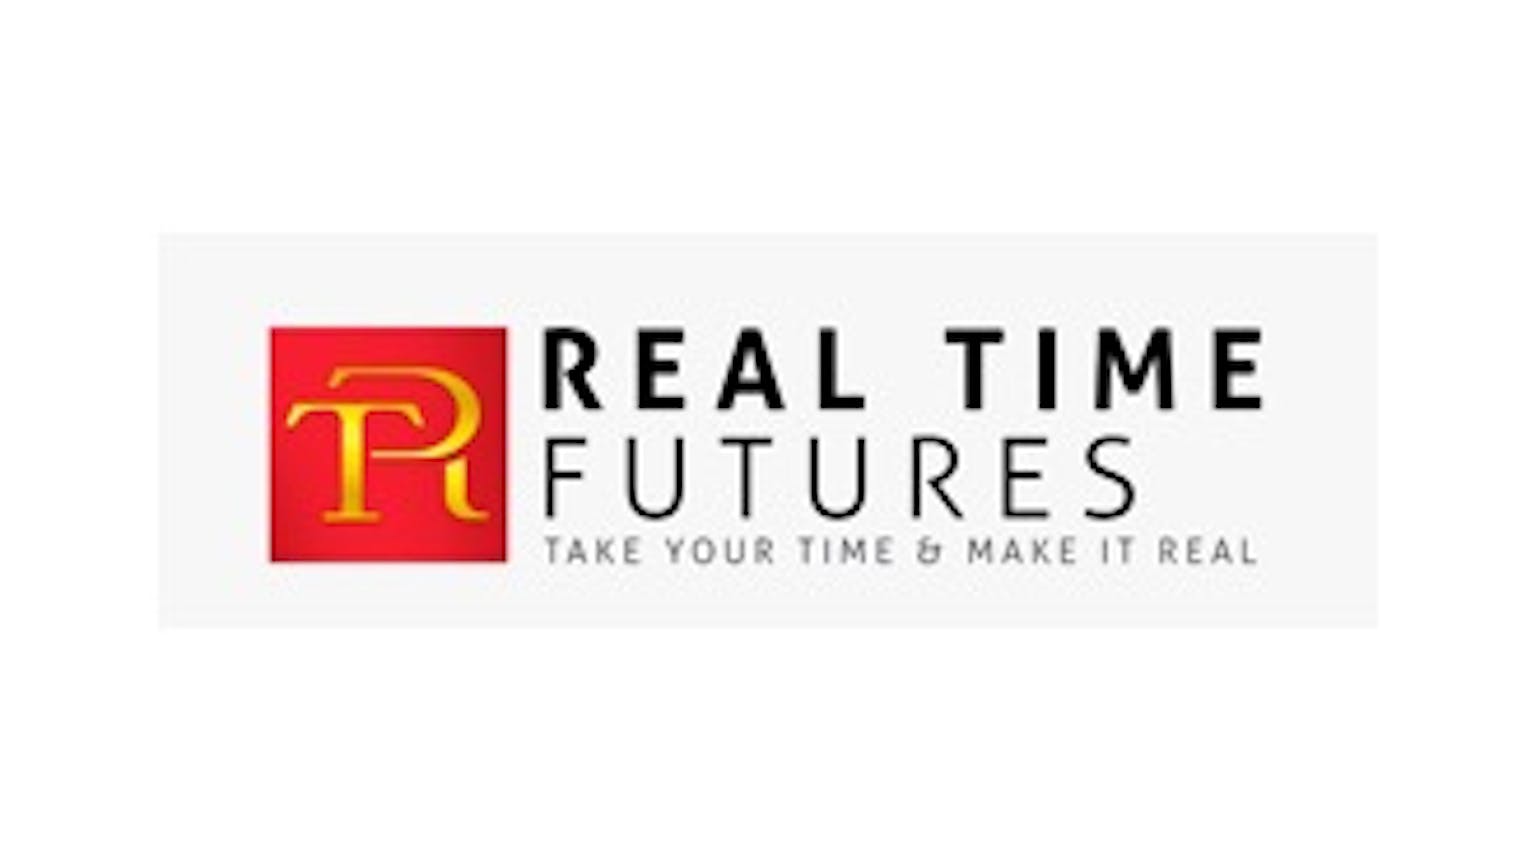 Real Time Futures